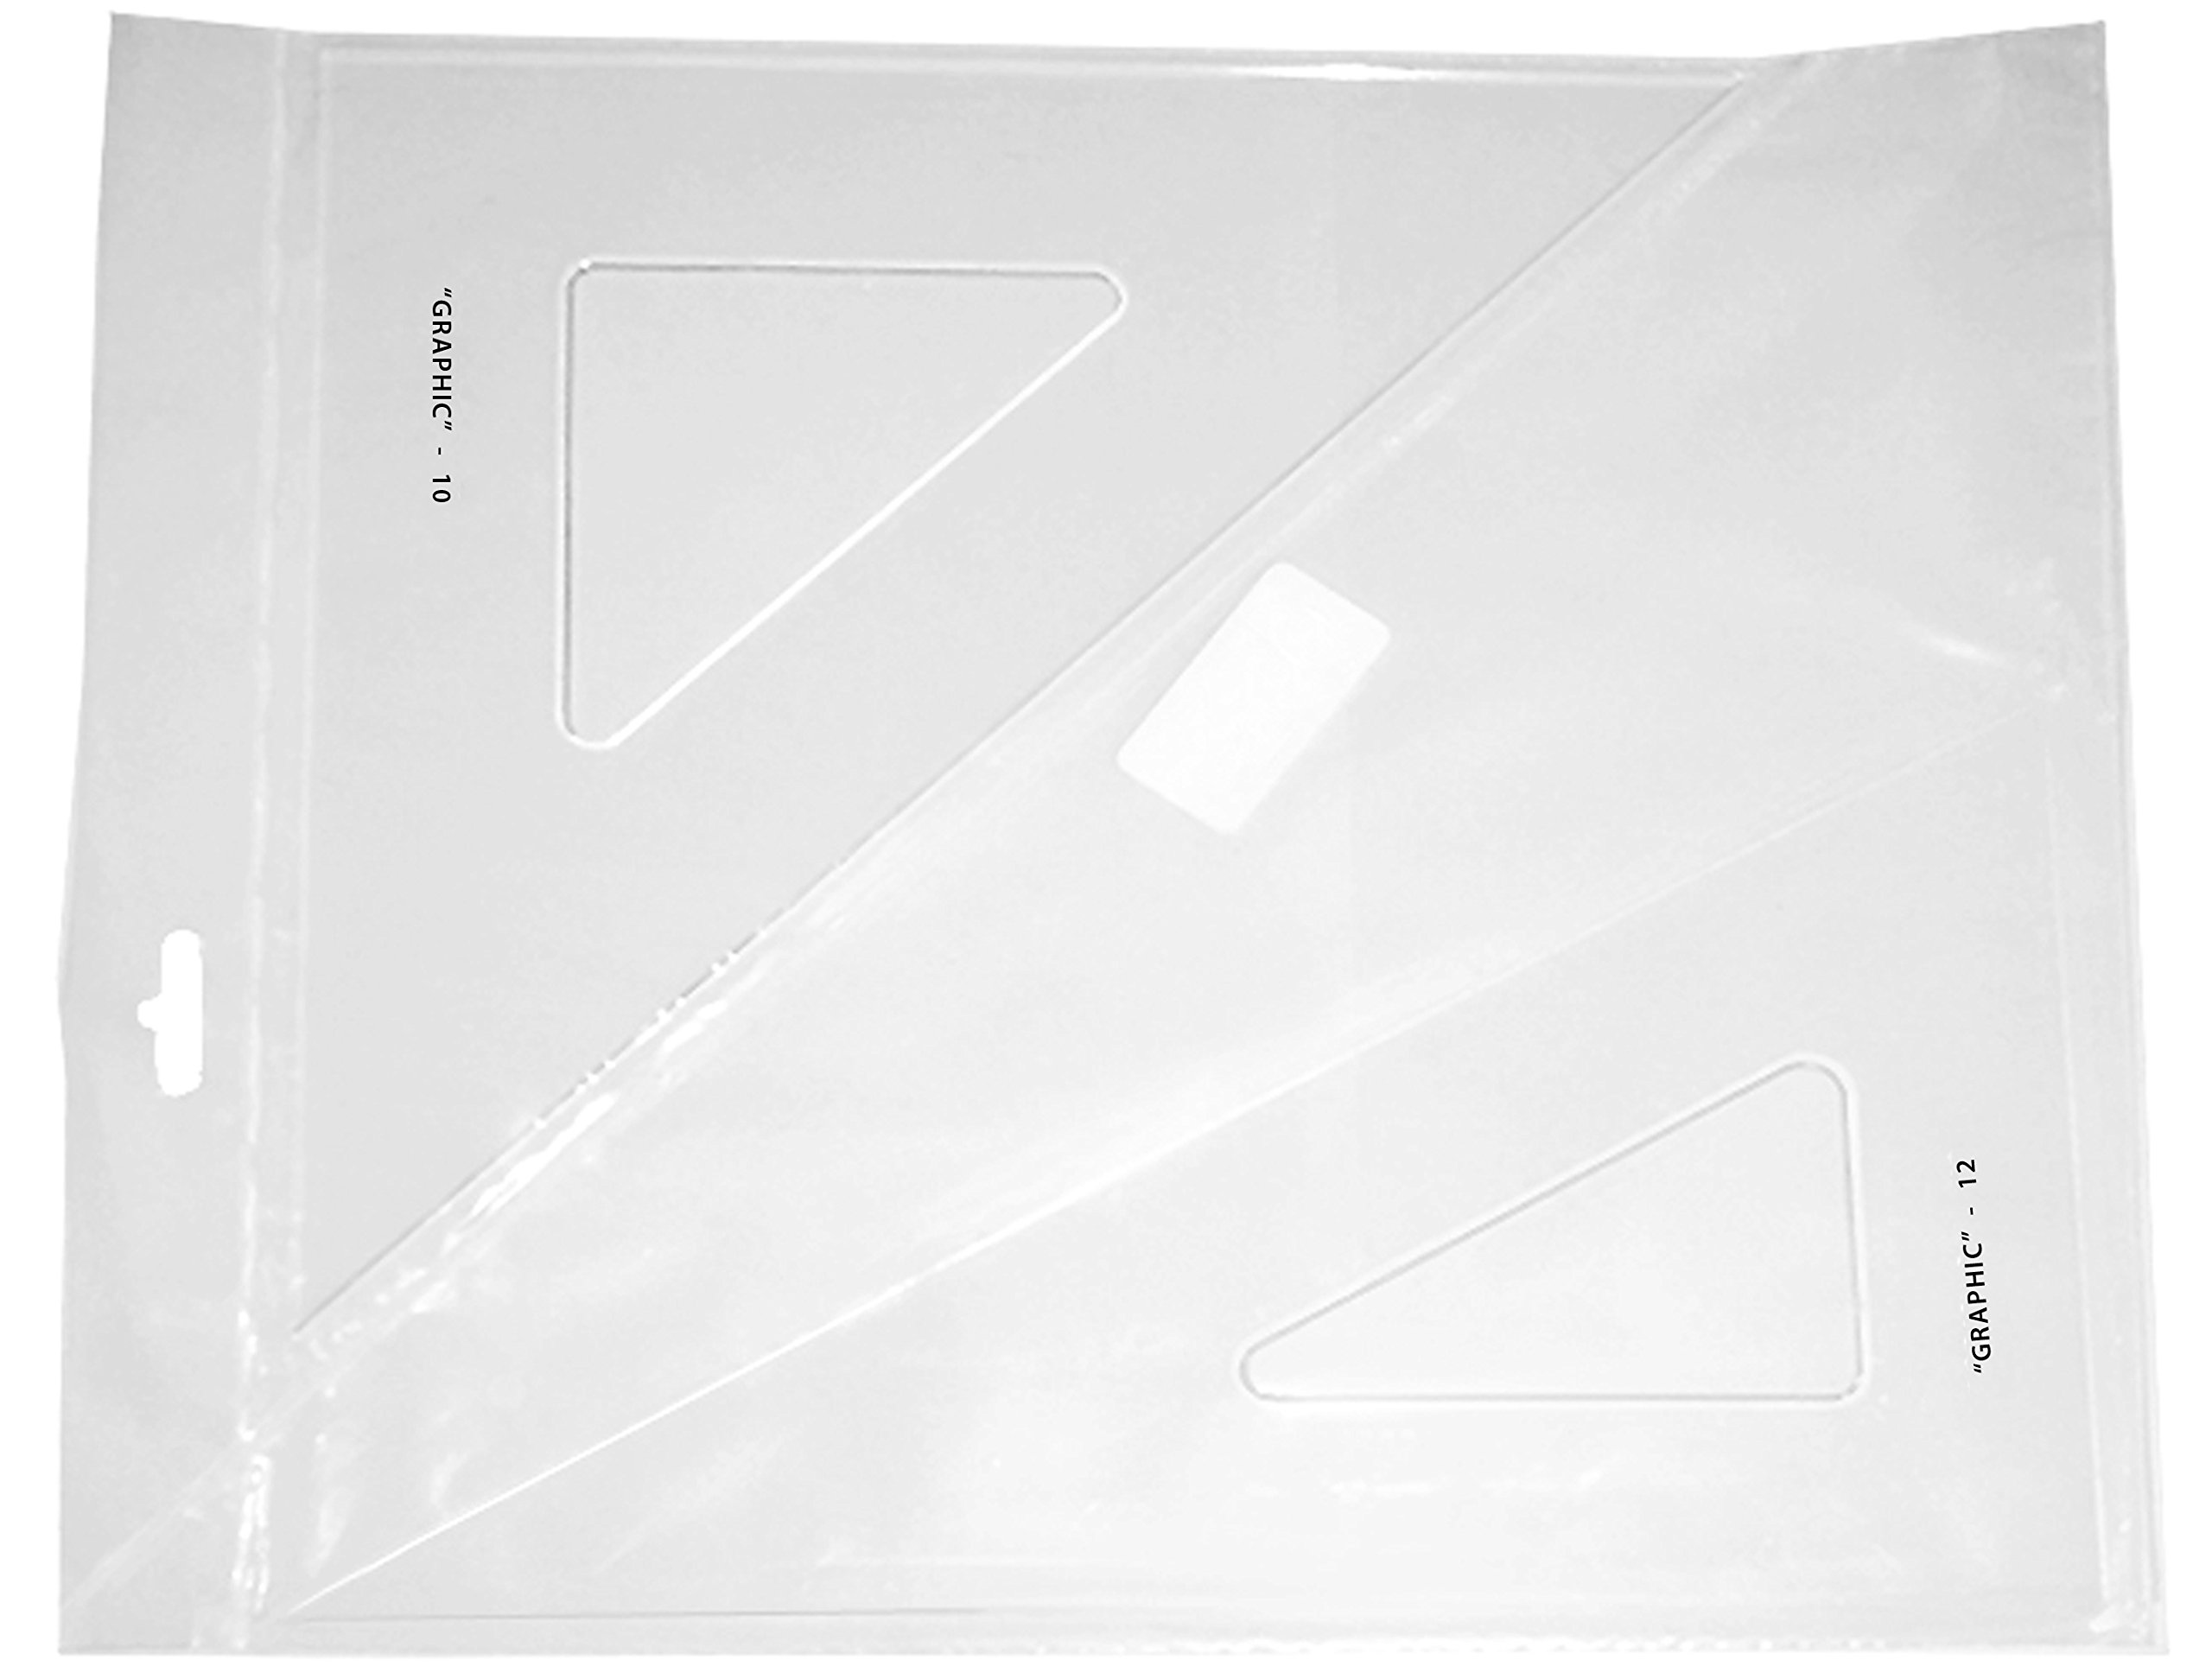 Book Cover ALVIN - Transparent Triangle Set, Economical Drafting Tool, Multipurpose for Design, Engineering, and Architecture, Great for Machining and Woodworking - Set of 2-10